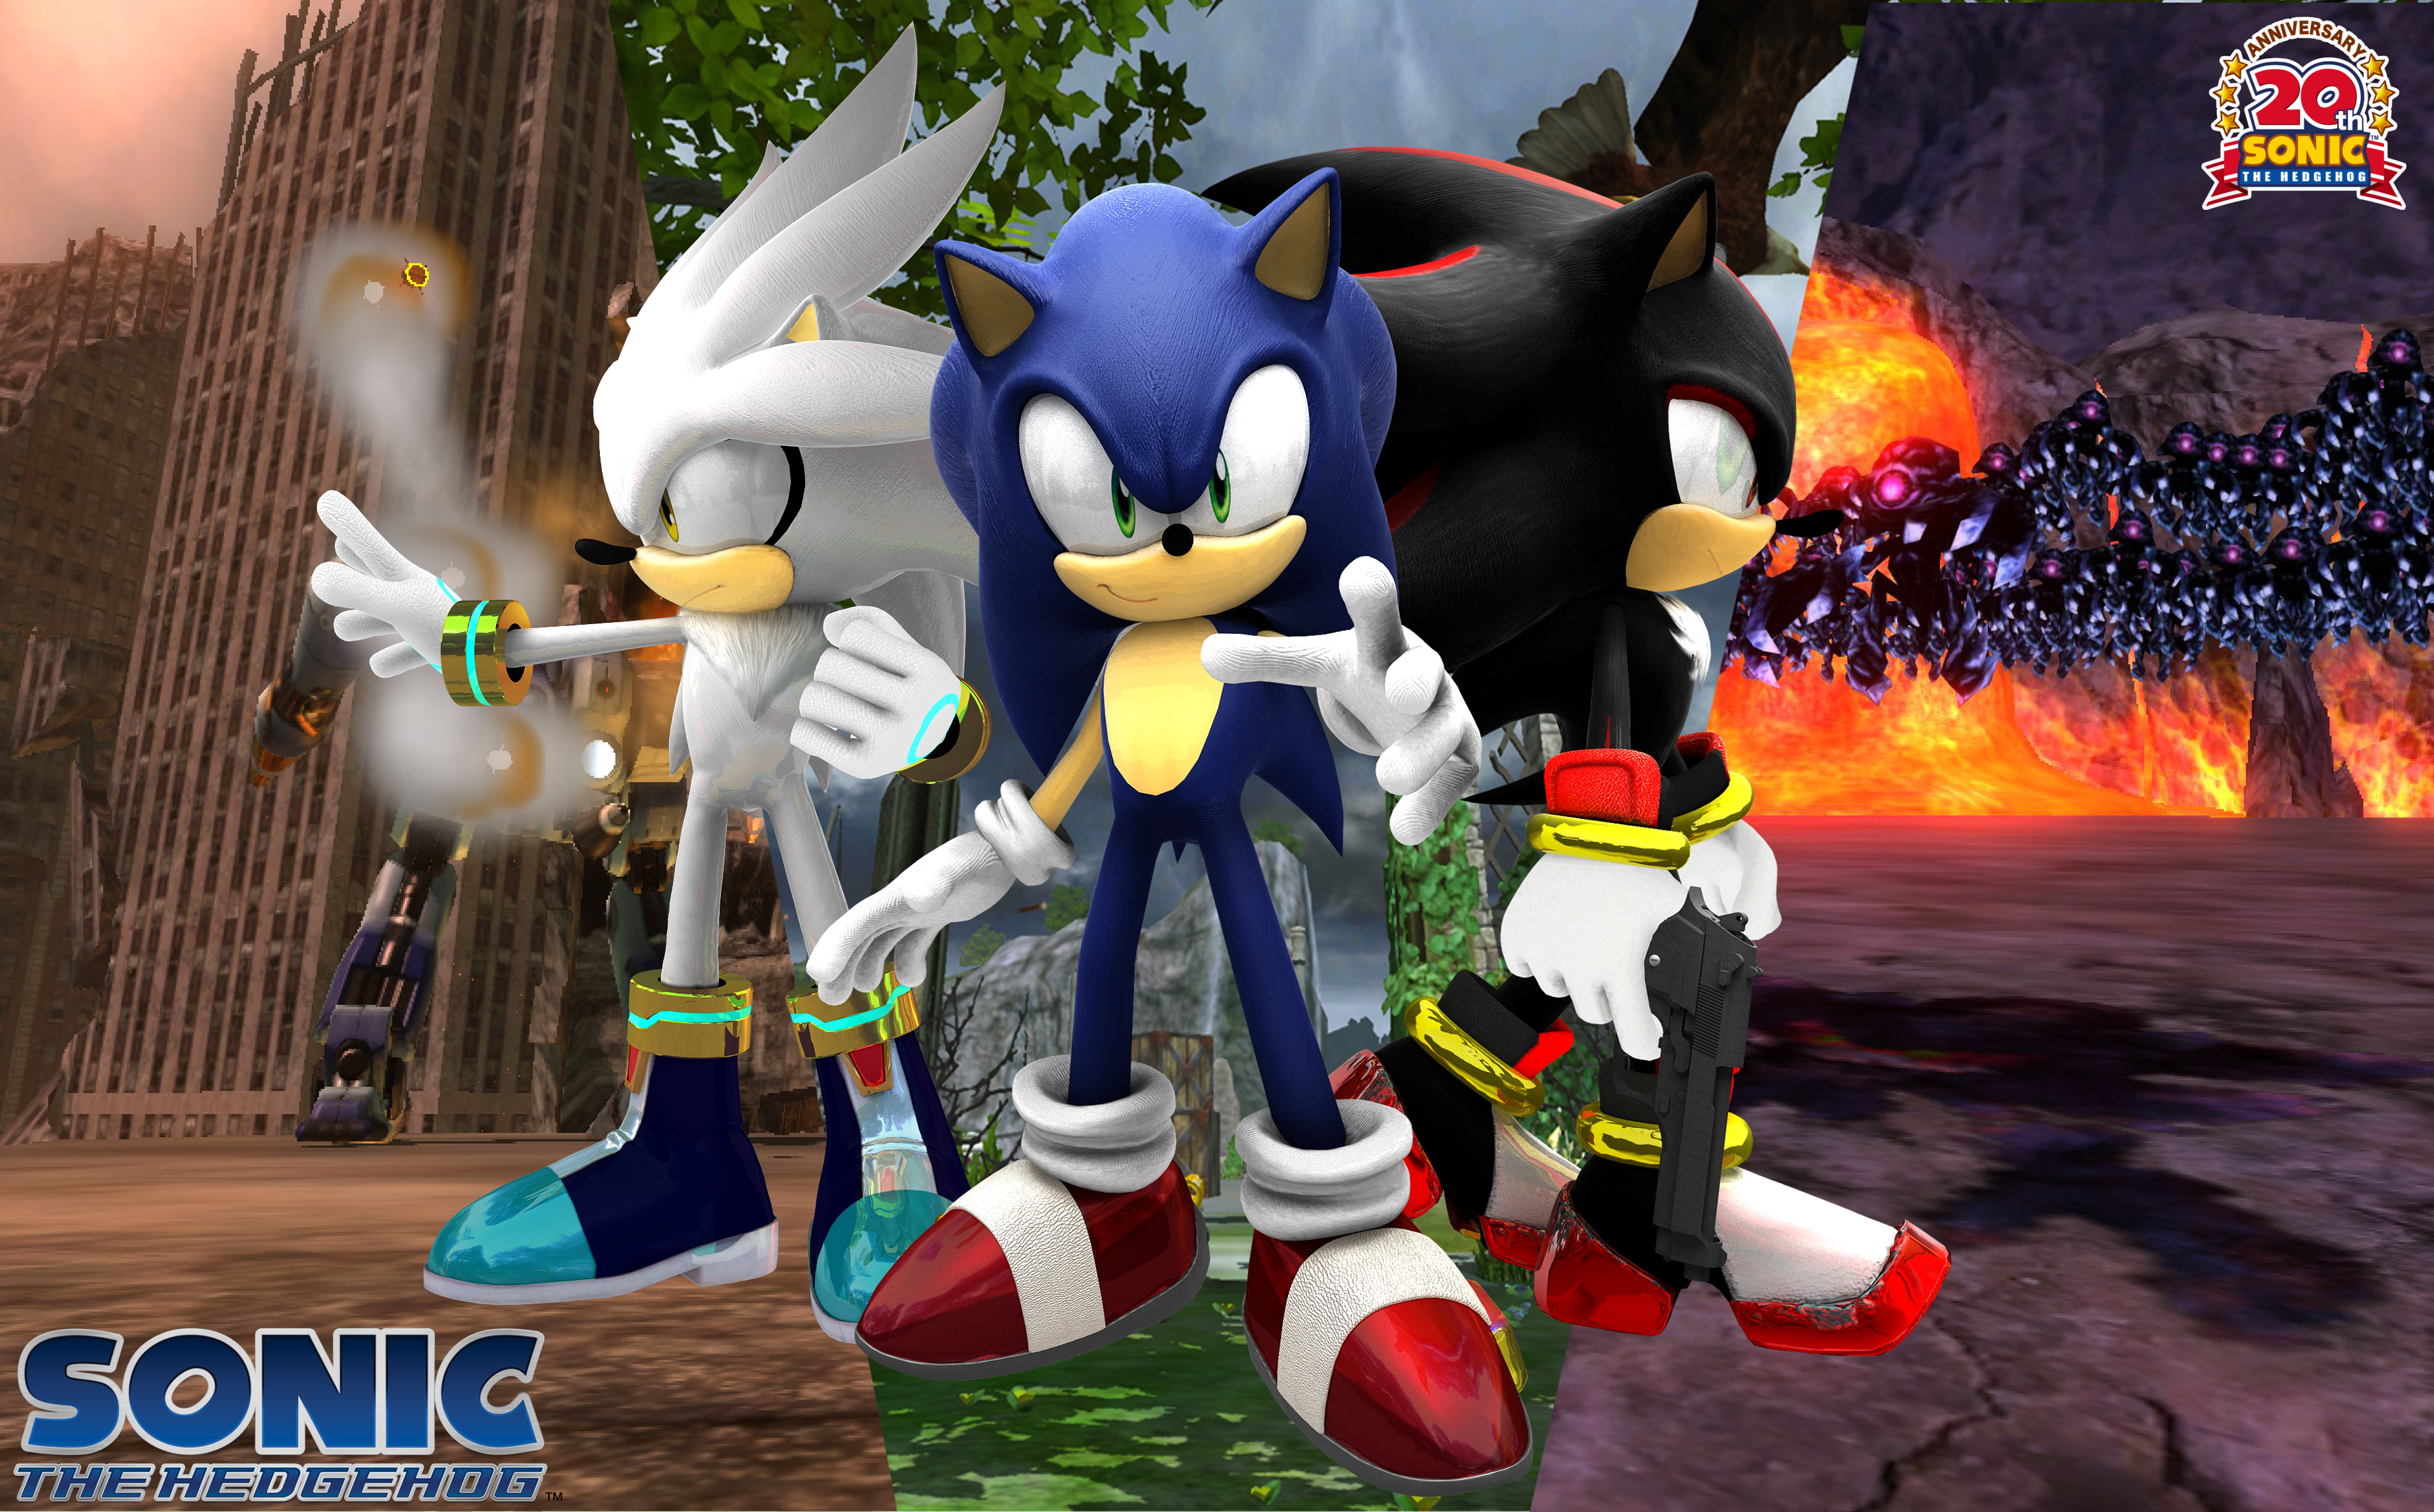 Free download Sonic Shadow and Silver image pastpresent and future wallpaper [3700x2299] for your Desktop, Mobile & Tablet. Explore Sonic Shadow and Silver Wallpaper. Sonic Shadow and Silver Wallpaper